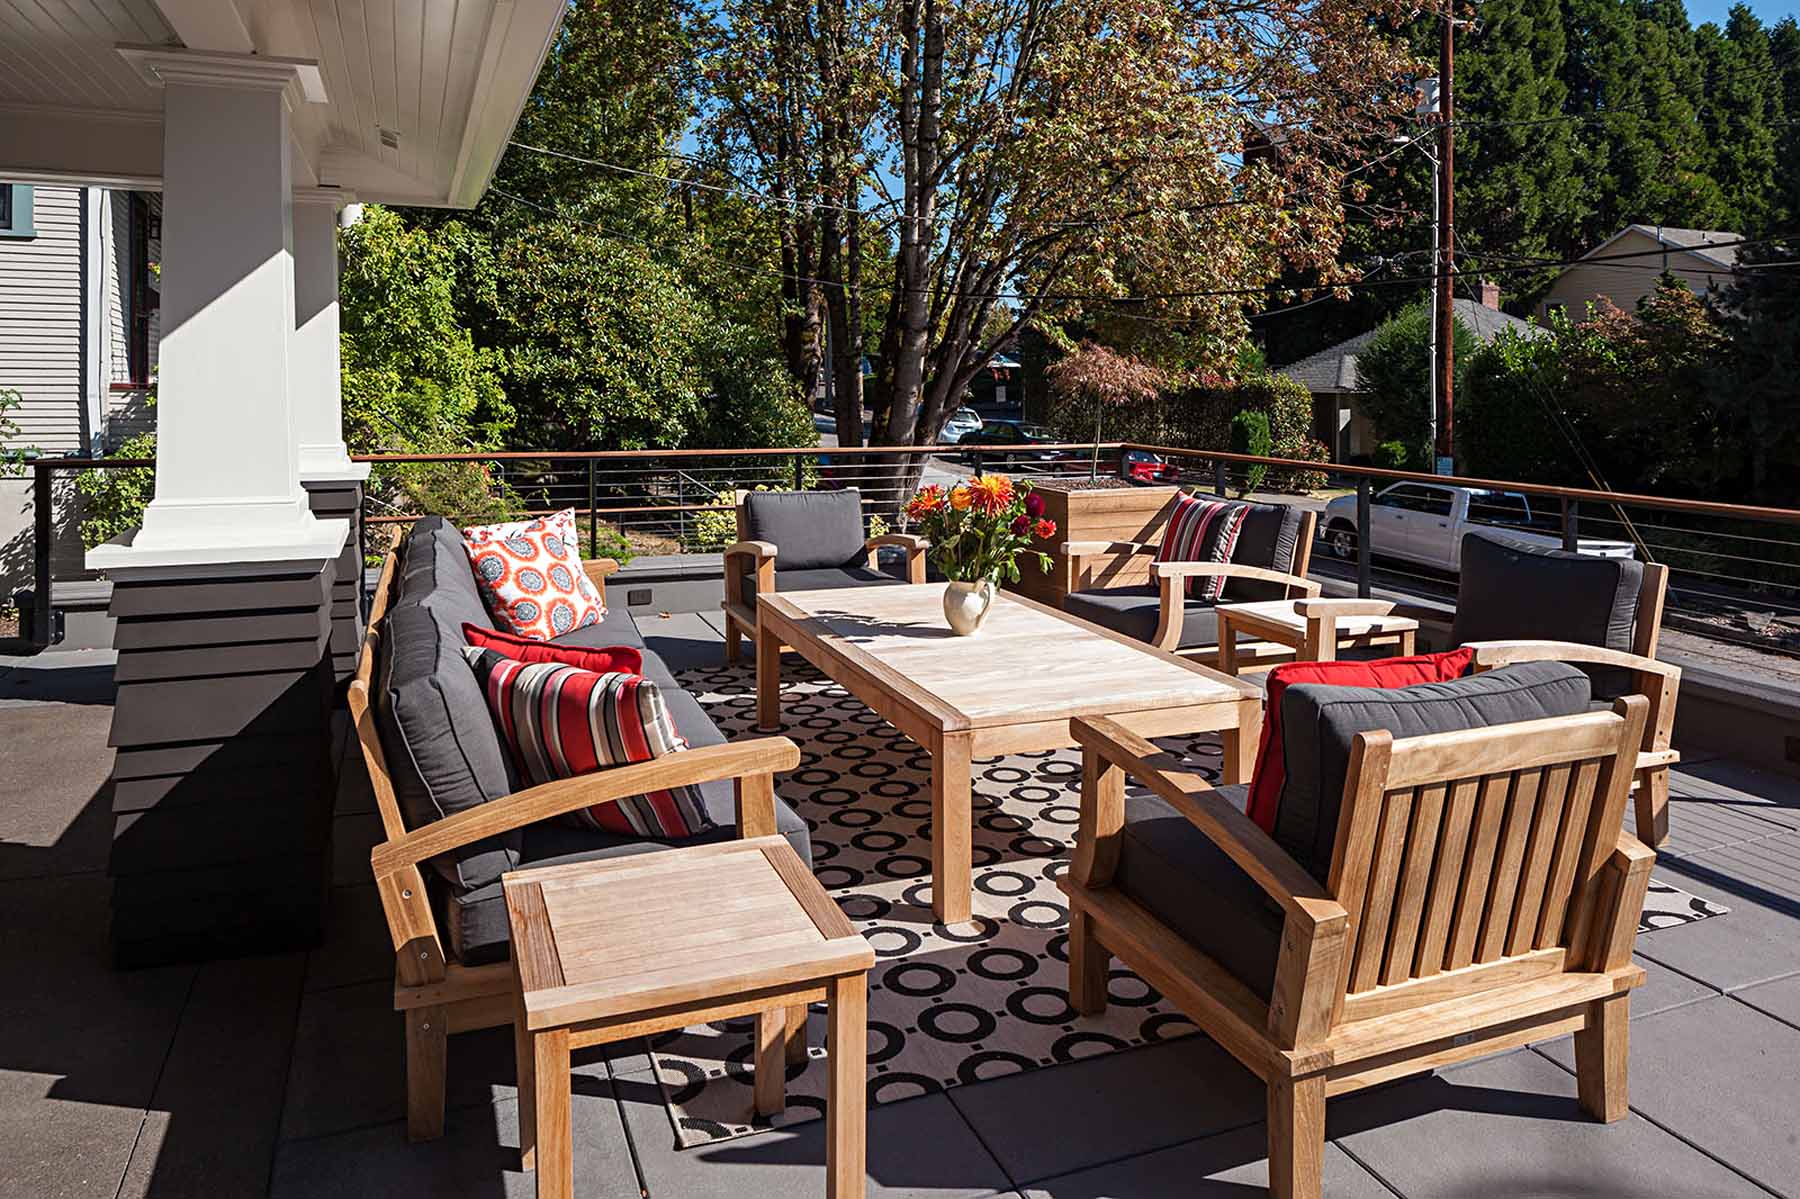 outdoor space with chairs and tables in a nice portland neighborhood